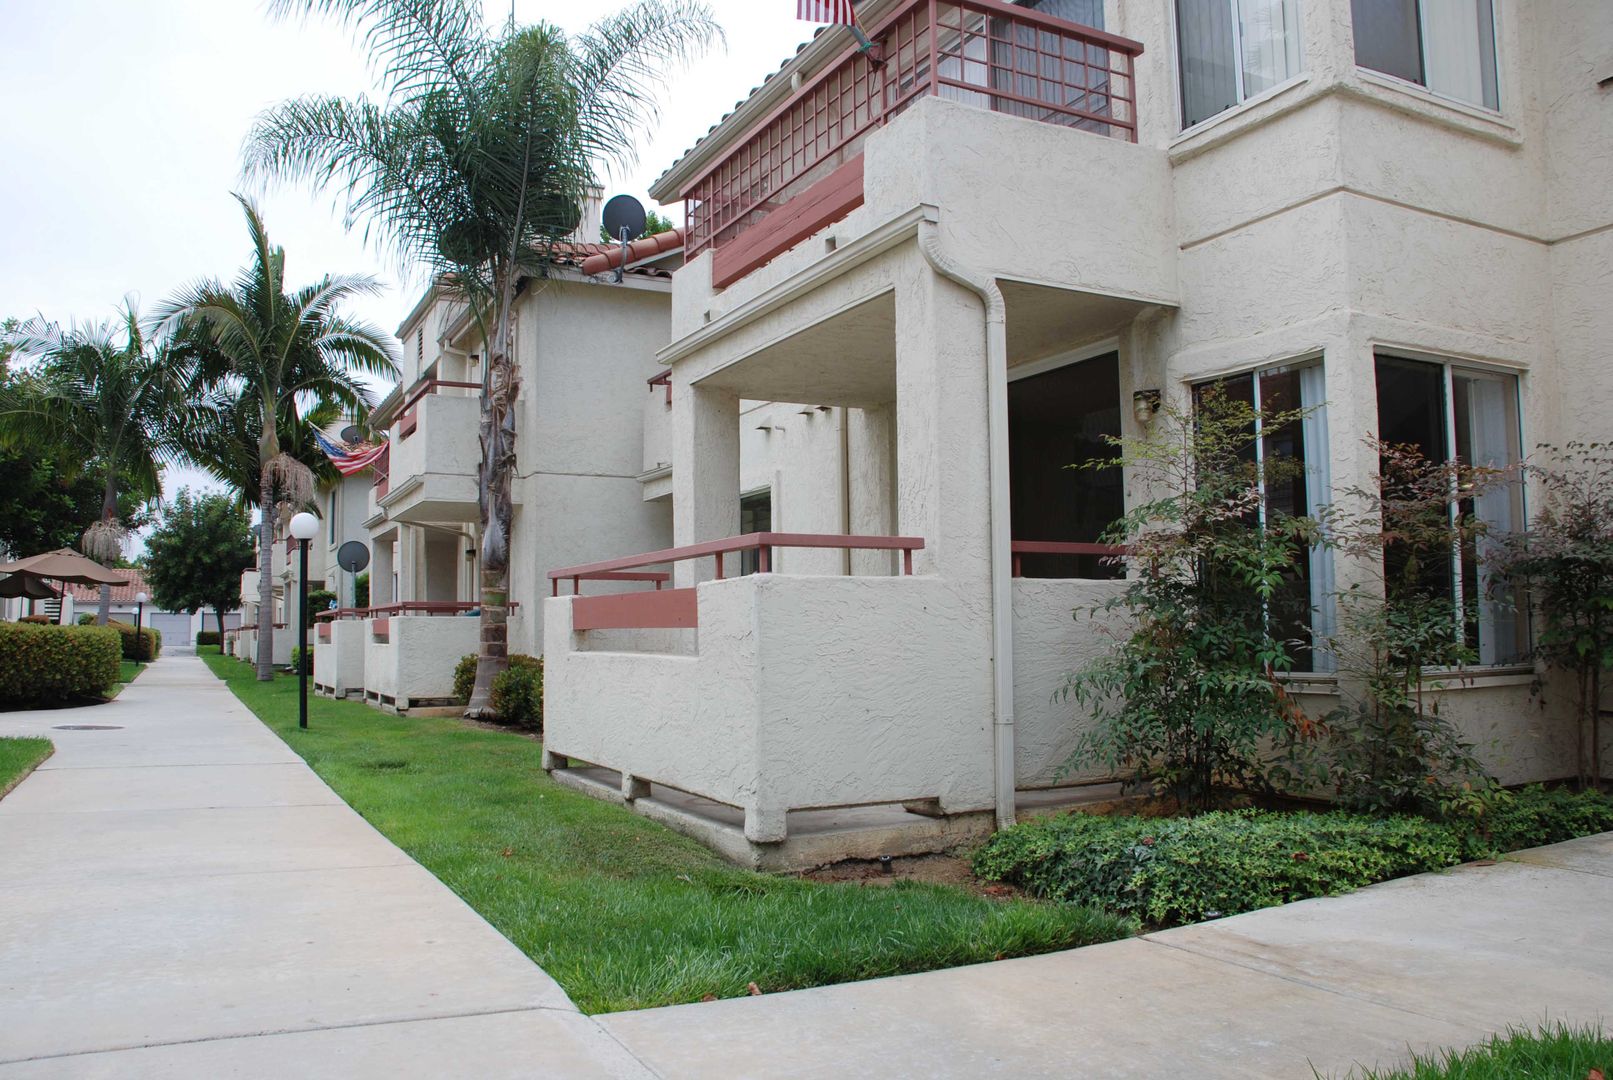 Vibrant 2 bedroom/2 bath condo in a great community with quick access to main commuter arteries